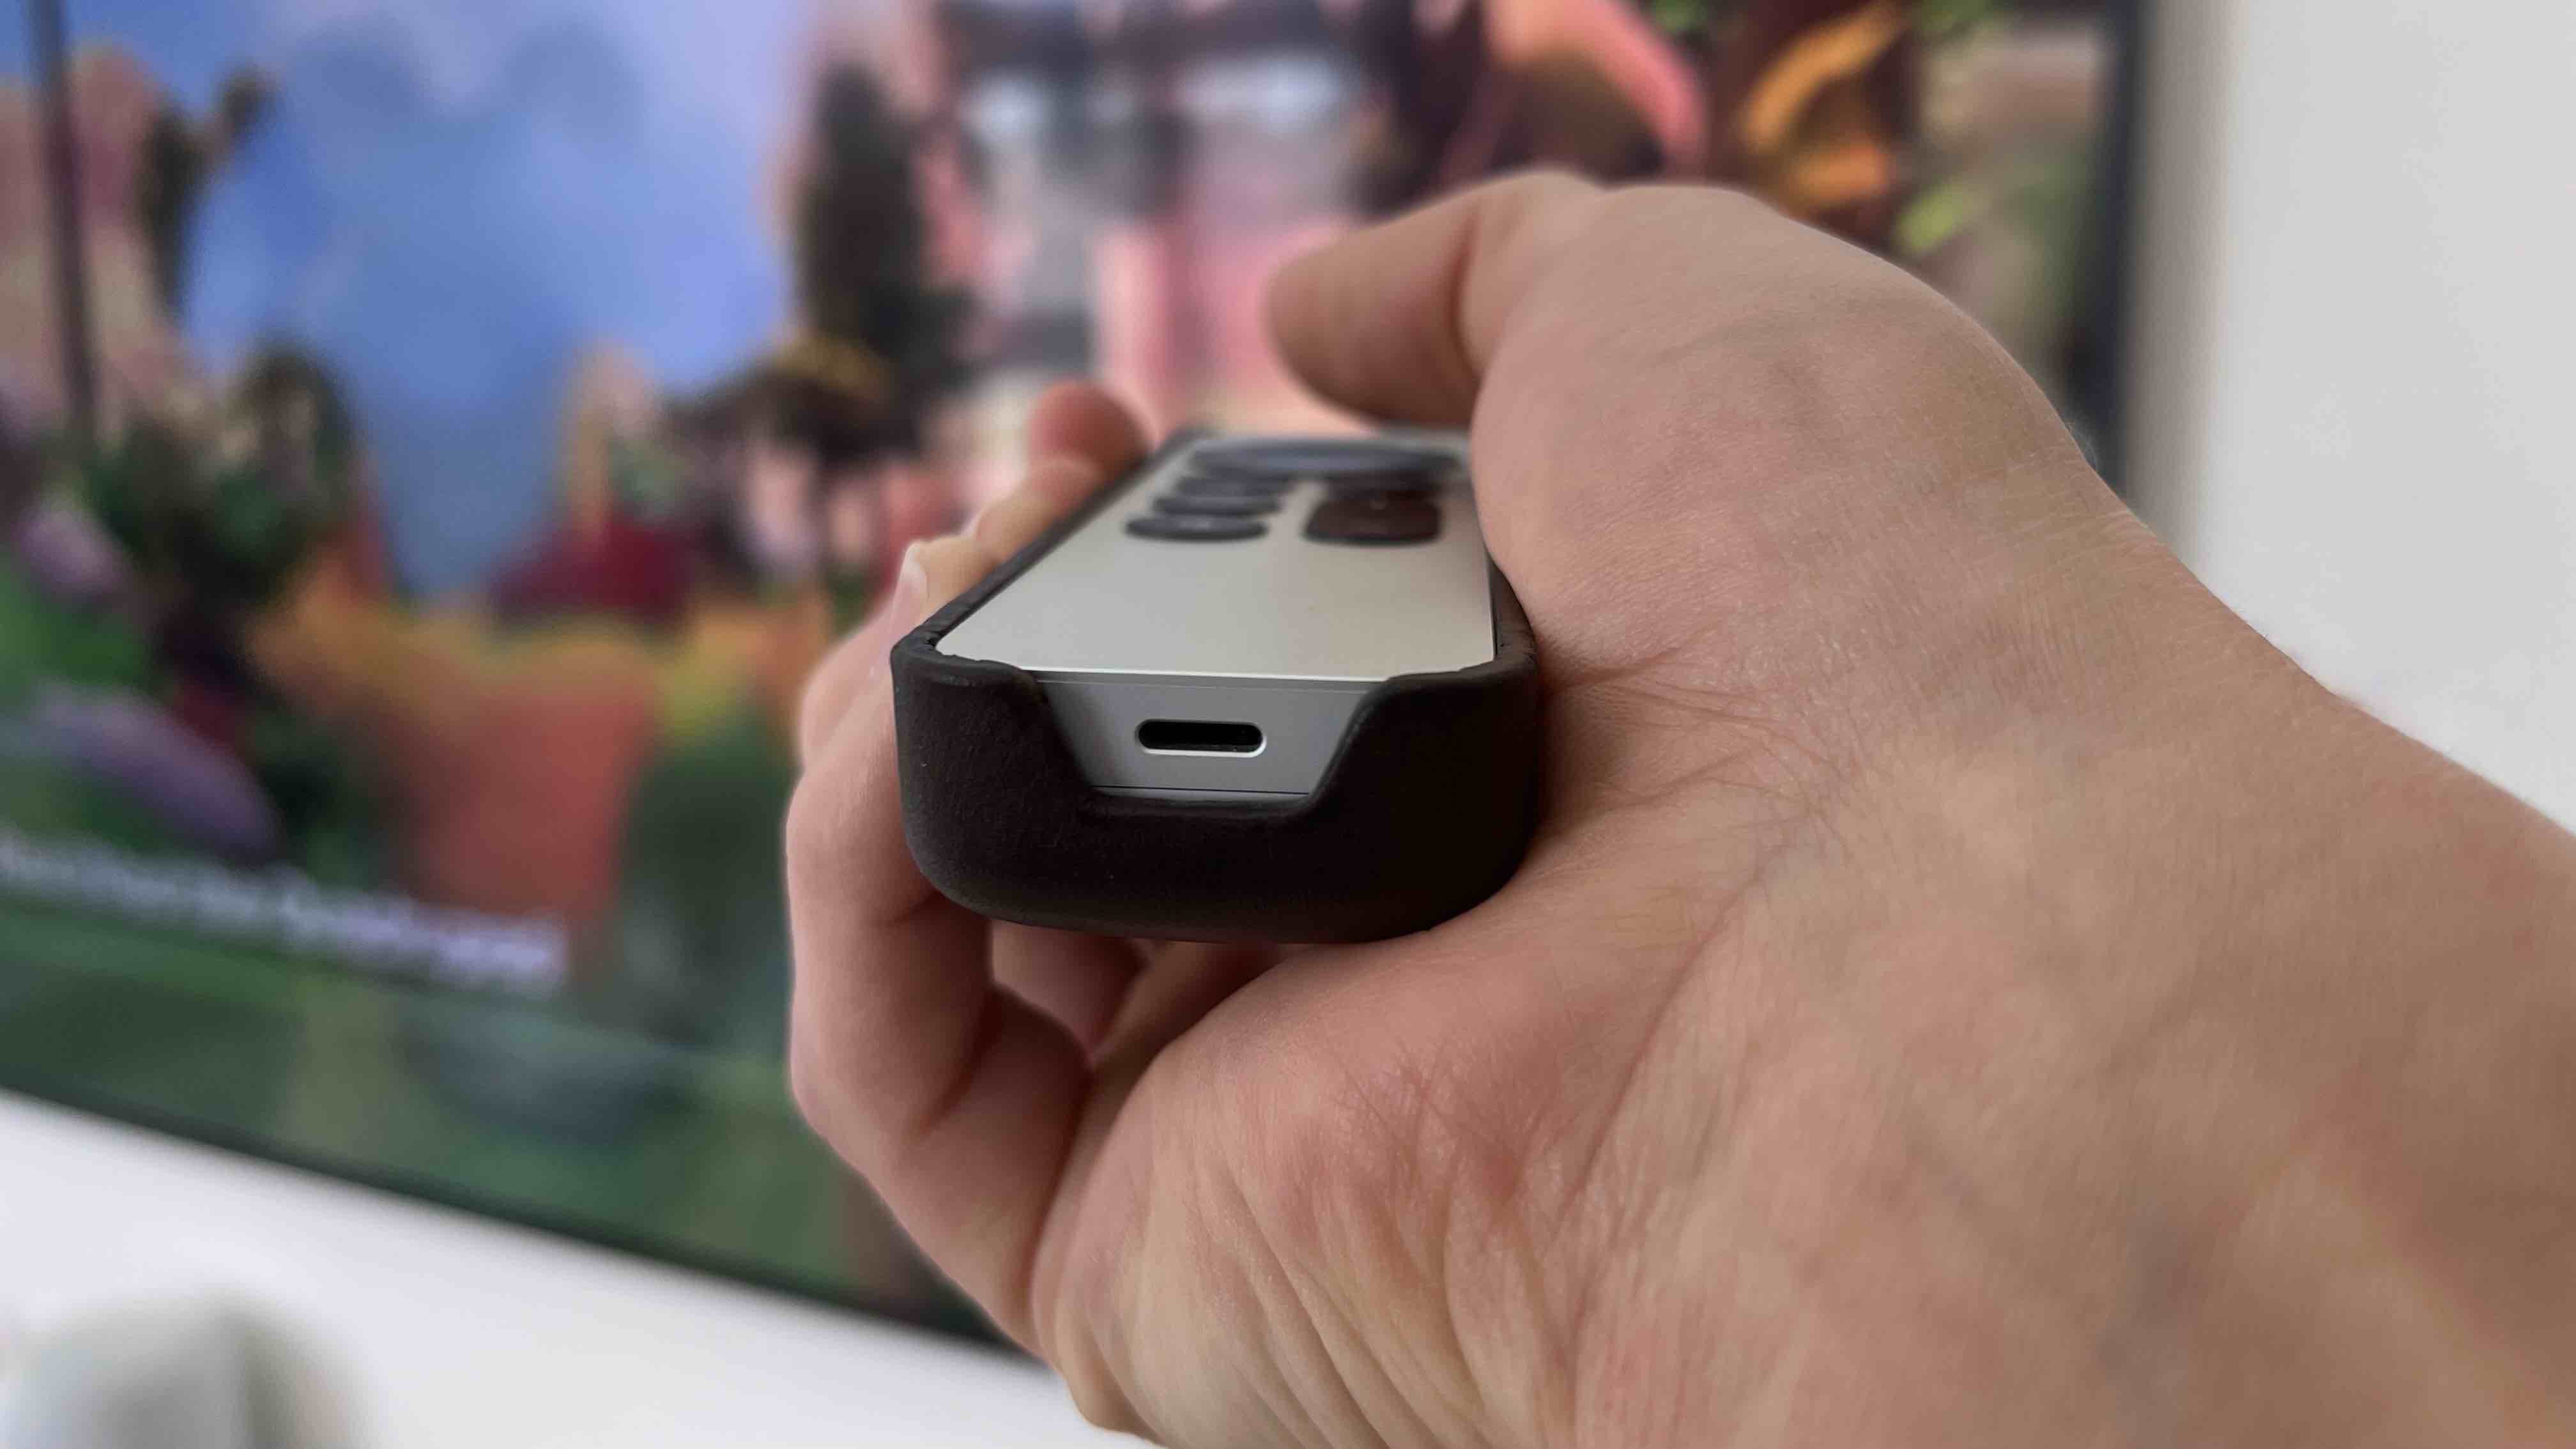 Leather cover for Apple TV Remote within reach